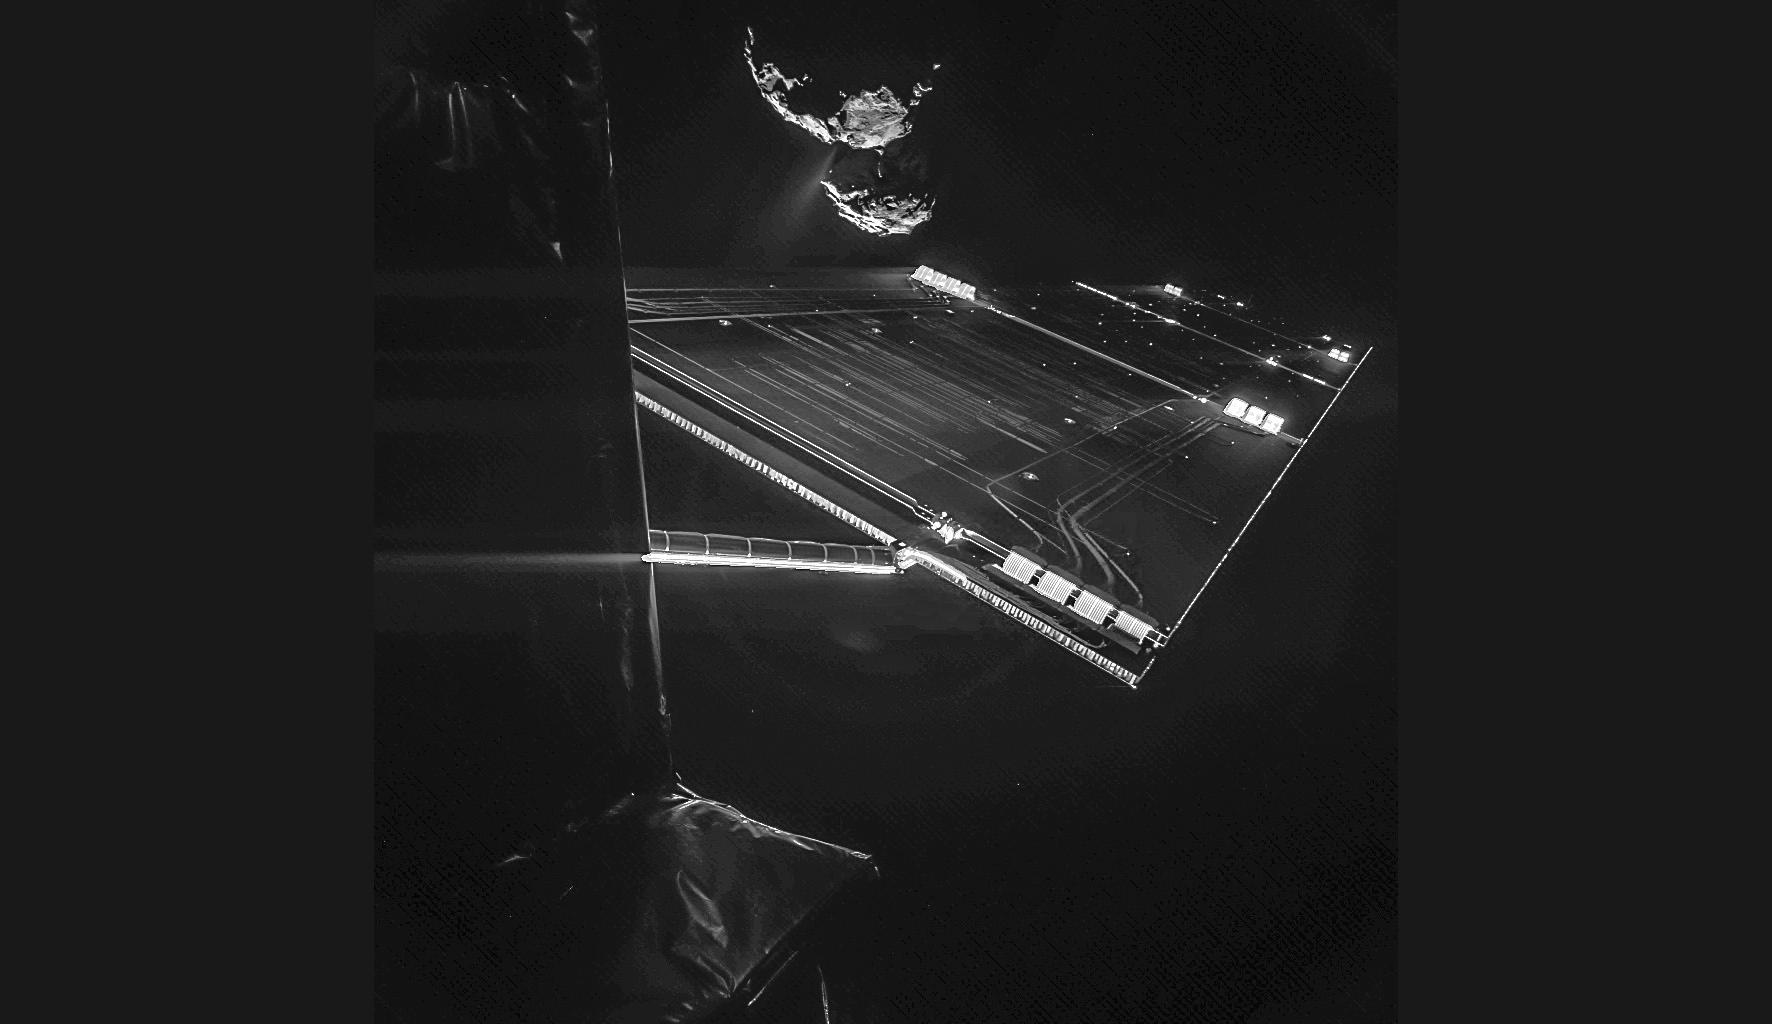 one of Rosetta s solar panels, with the comet in the background.